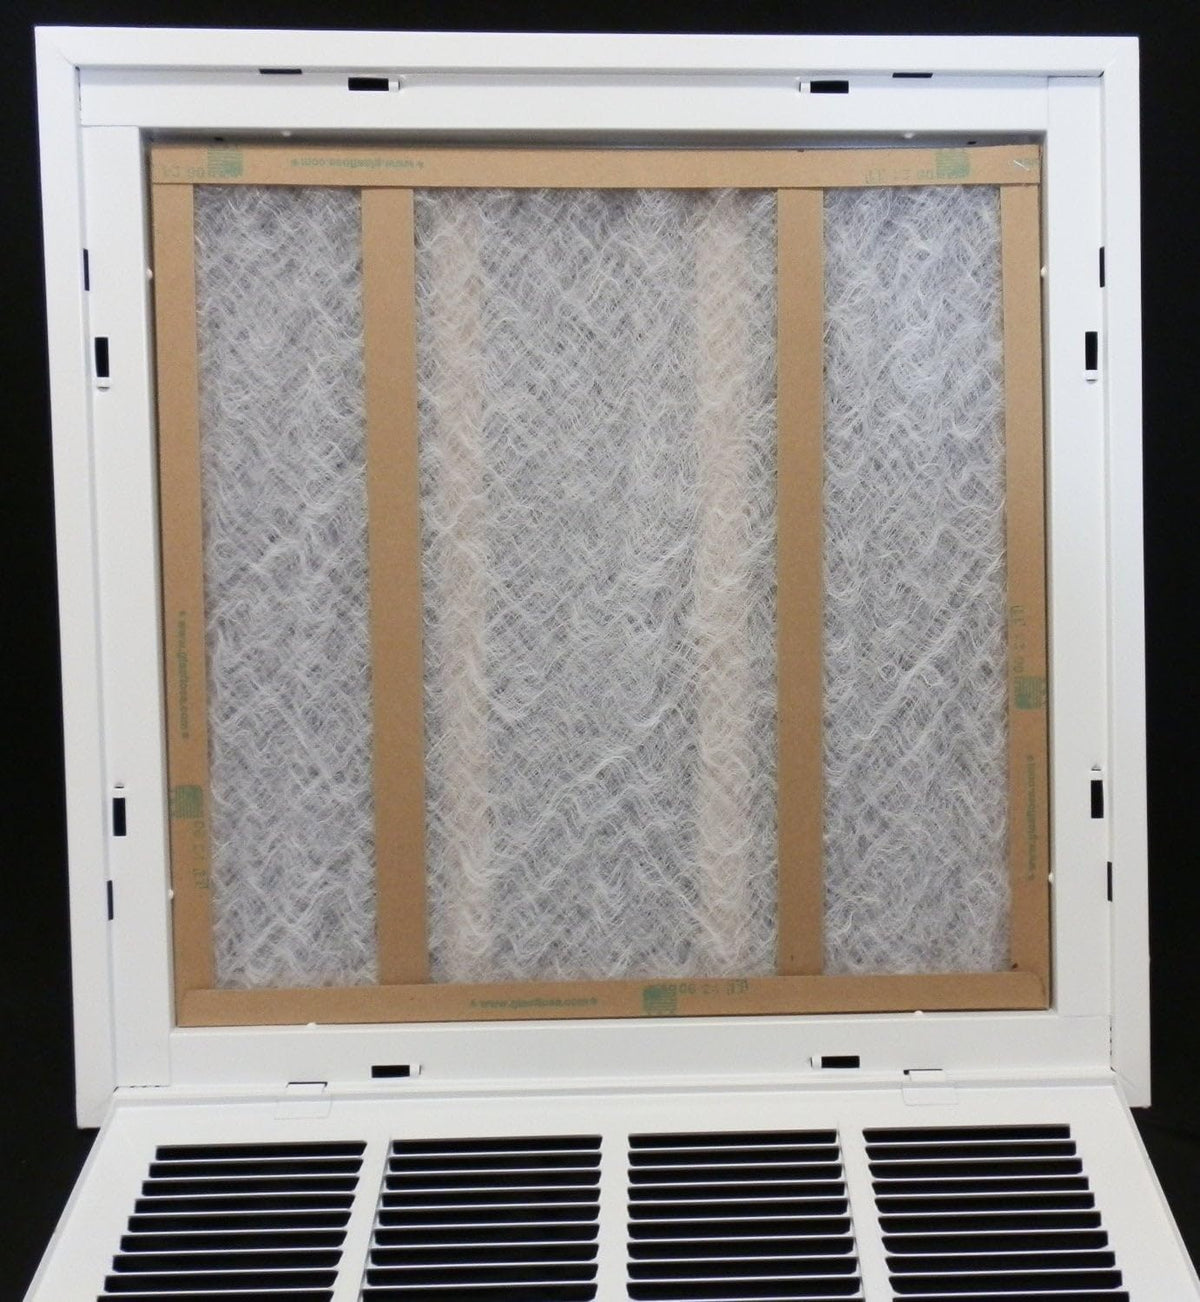 32&quot; X 14&quot; Steel Return Air Filter Grille for 1&quot; Filter - Removable Frame - [Outer Dimensions: 34 5/8&quot; X 16 5/8&quot;]